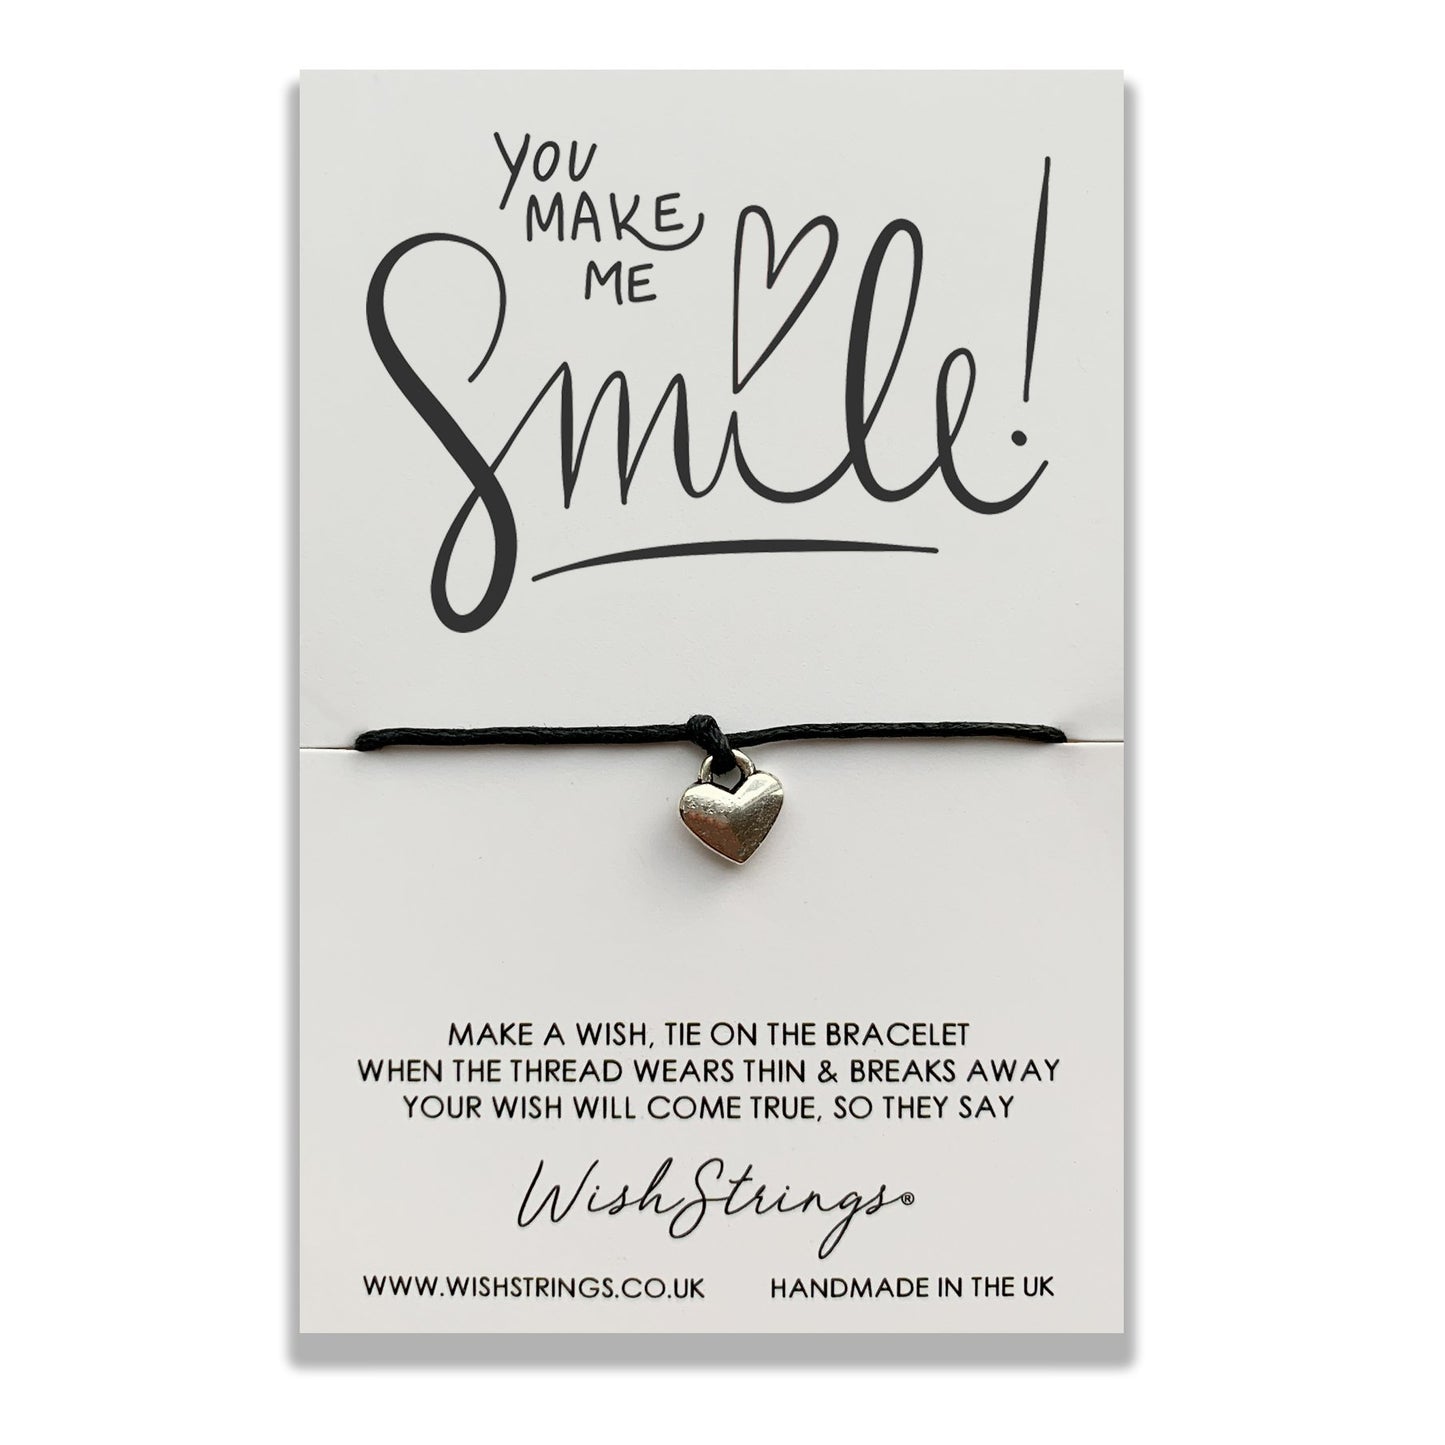 You Make Me Smile! Wish String Bracelet With Lucky Charm